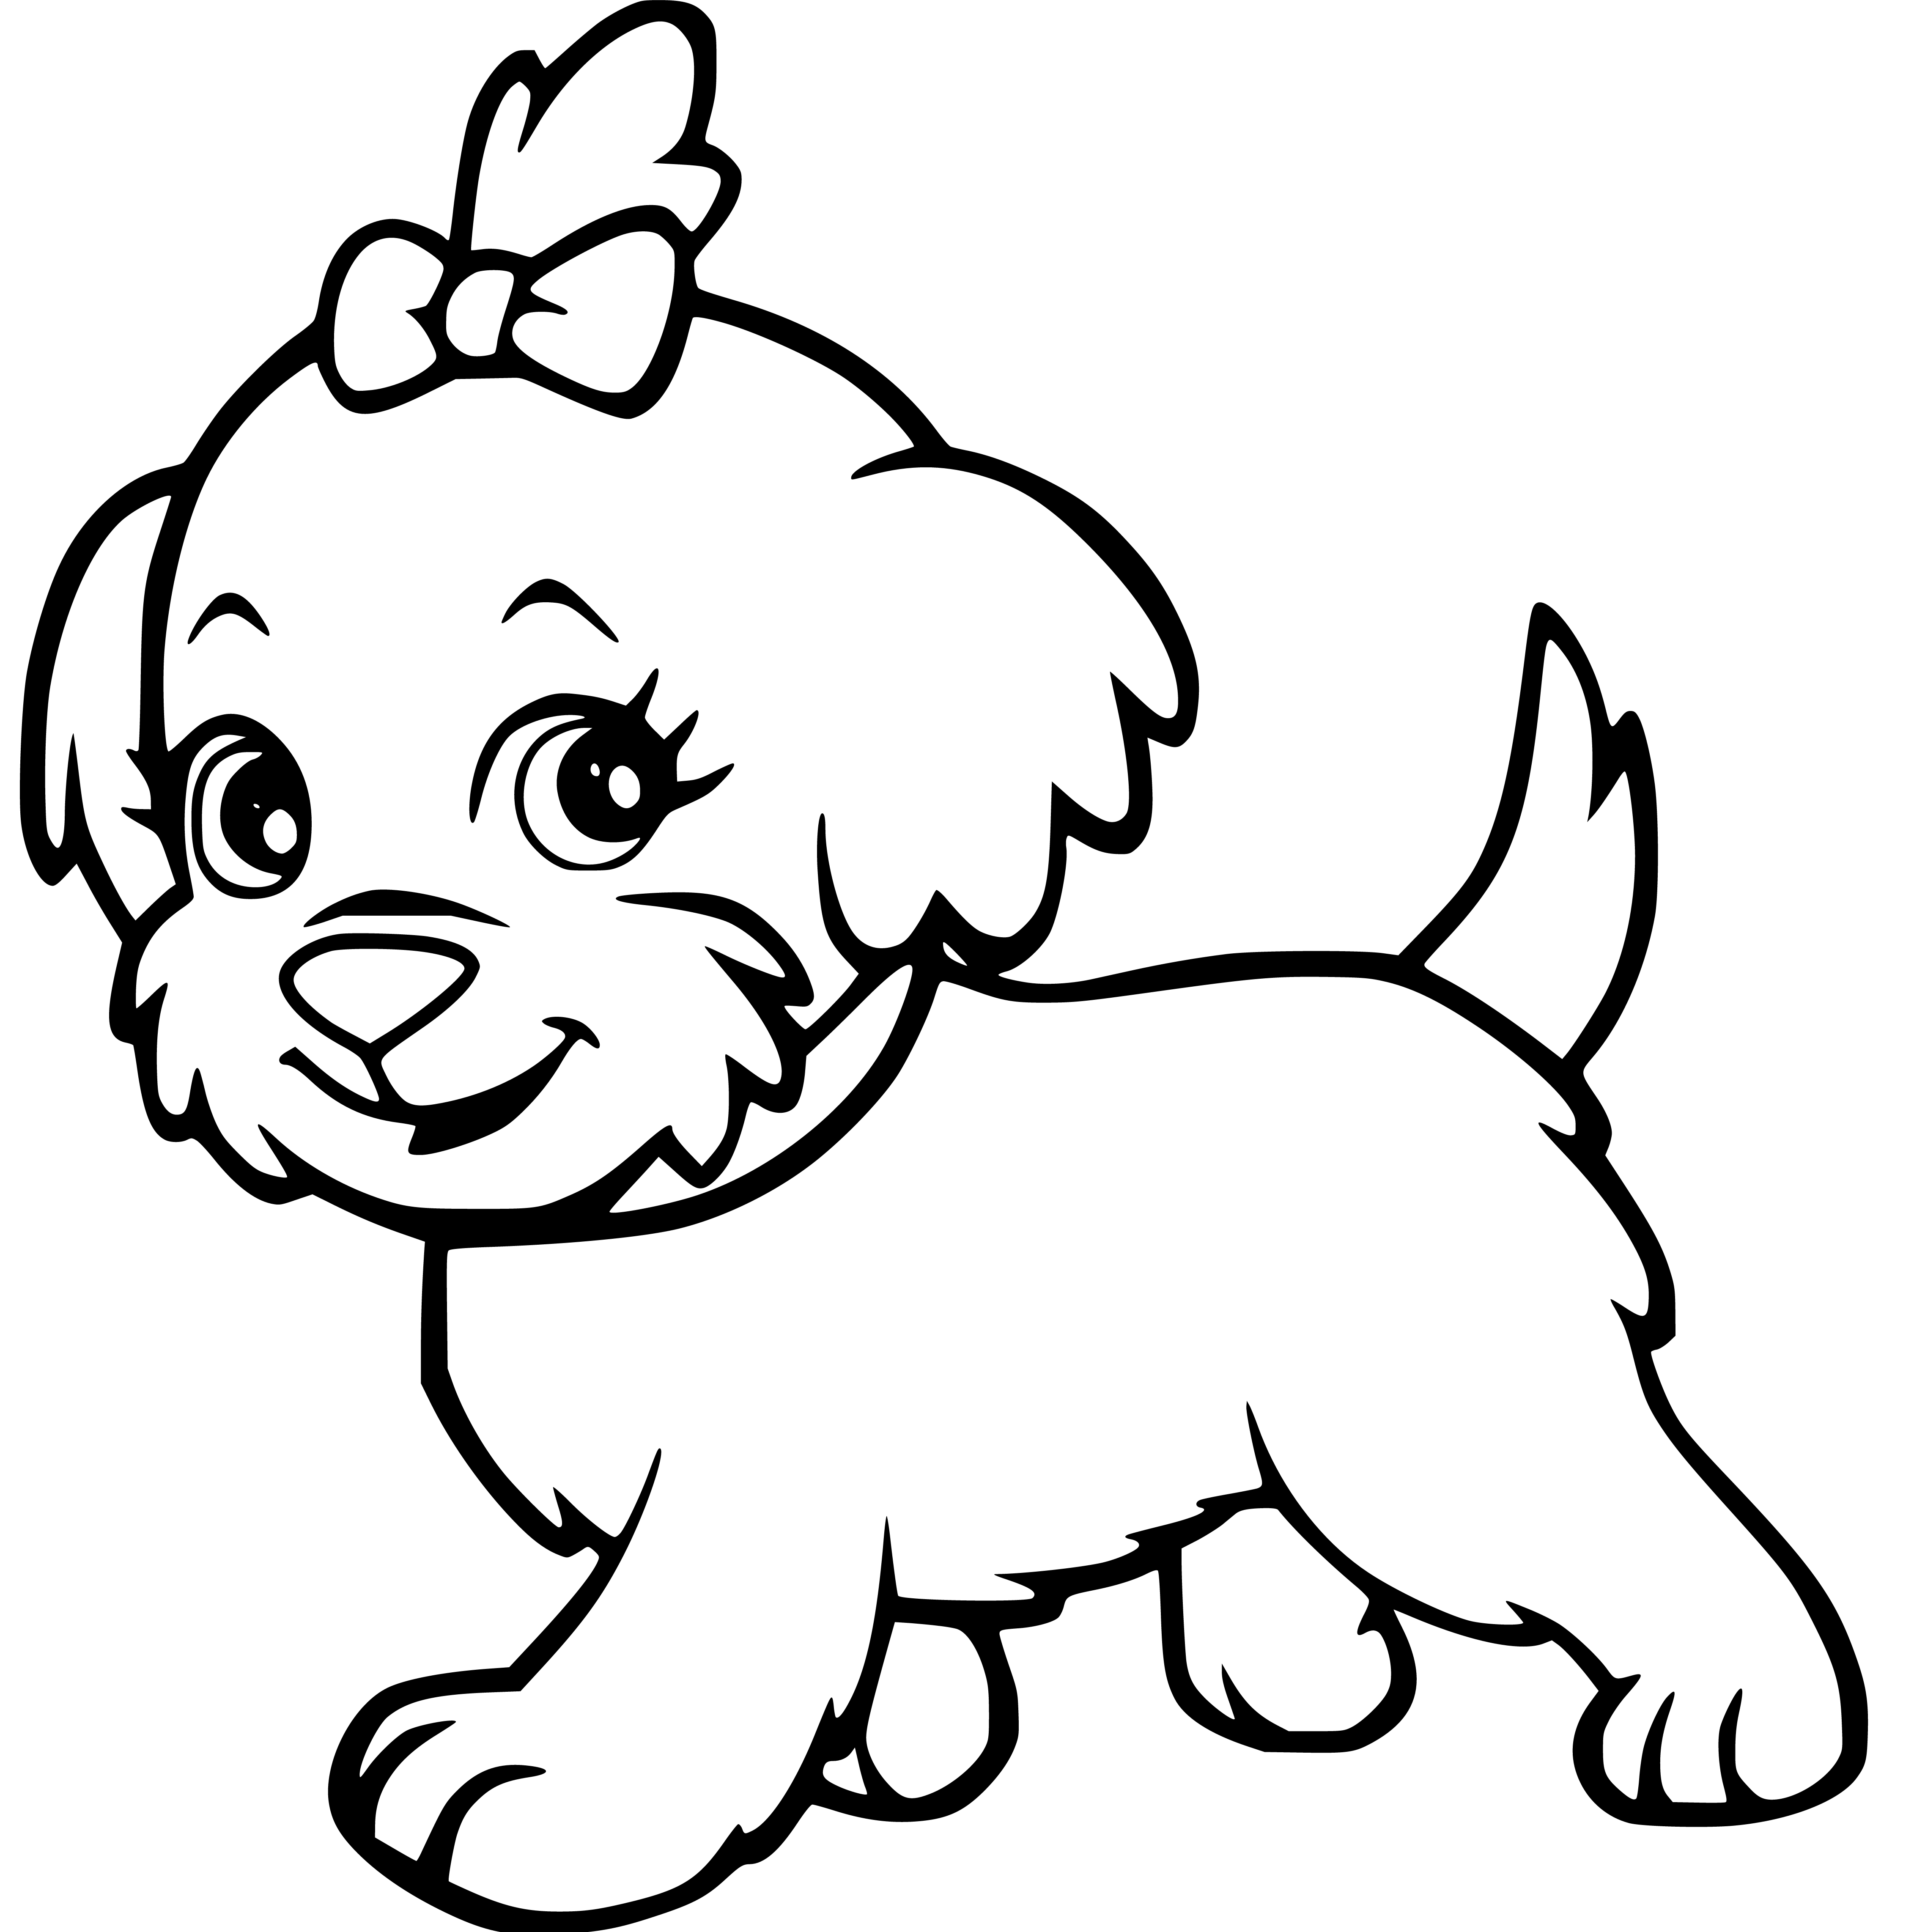 Printable Sweet Puppy Coloring Page for kids.